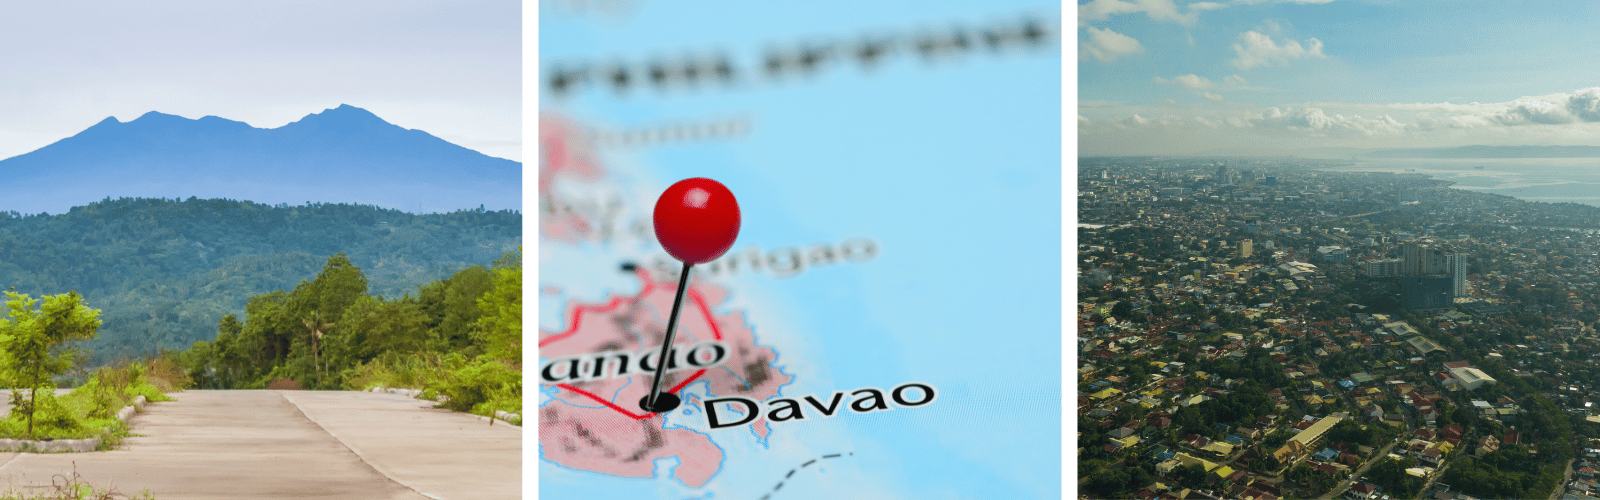 Different pictures present Davao City and the Region as a BPO destination.